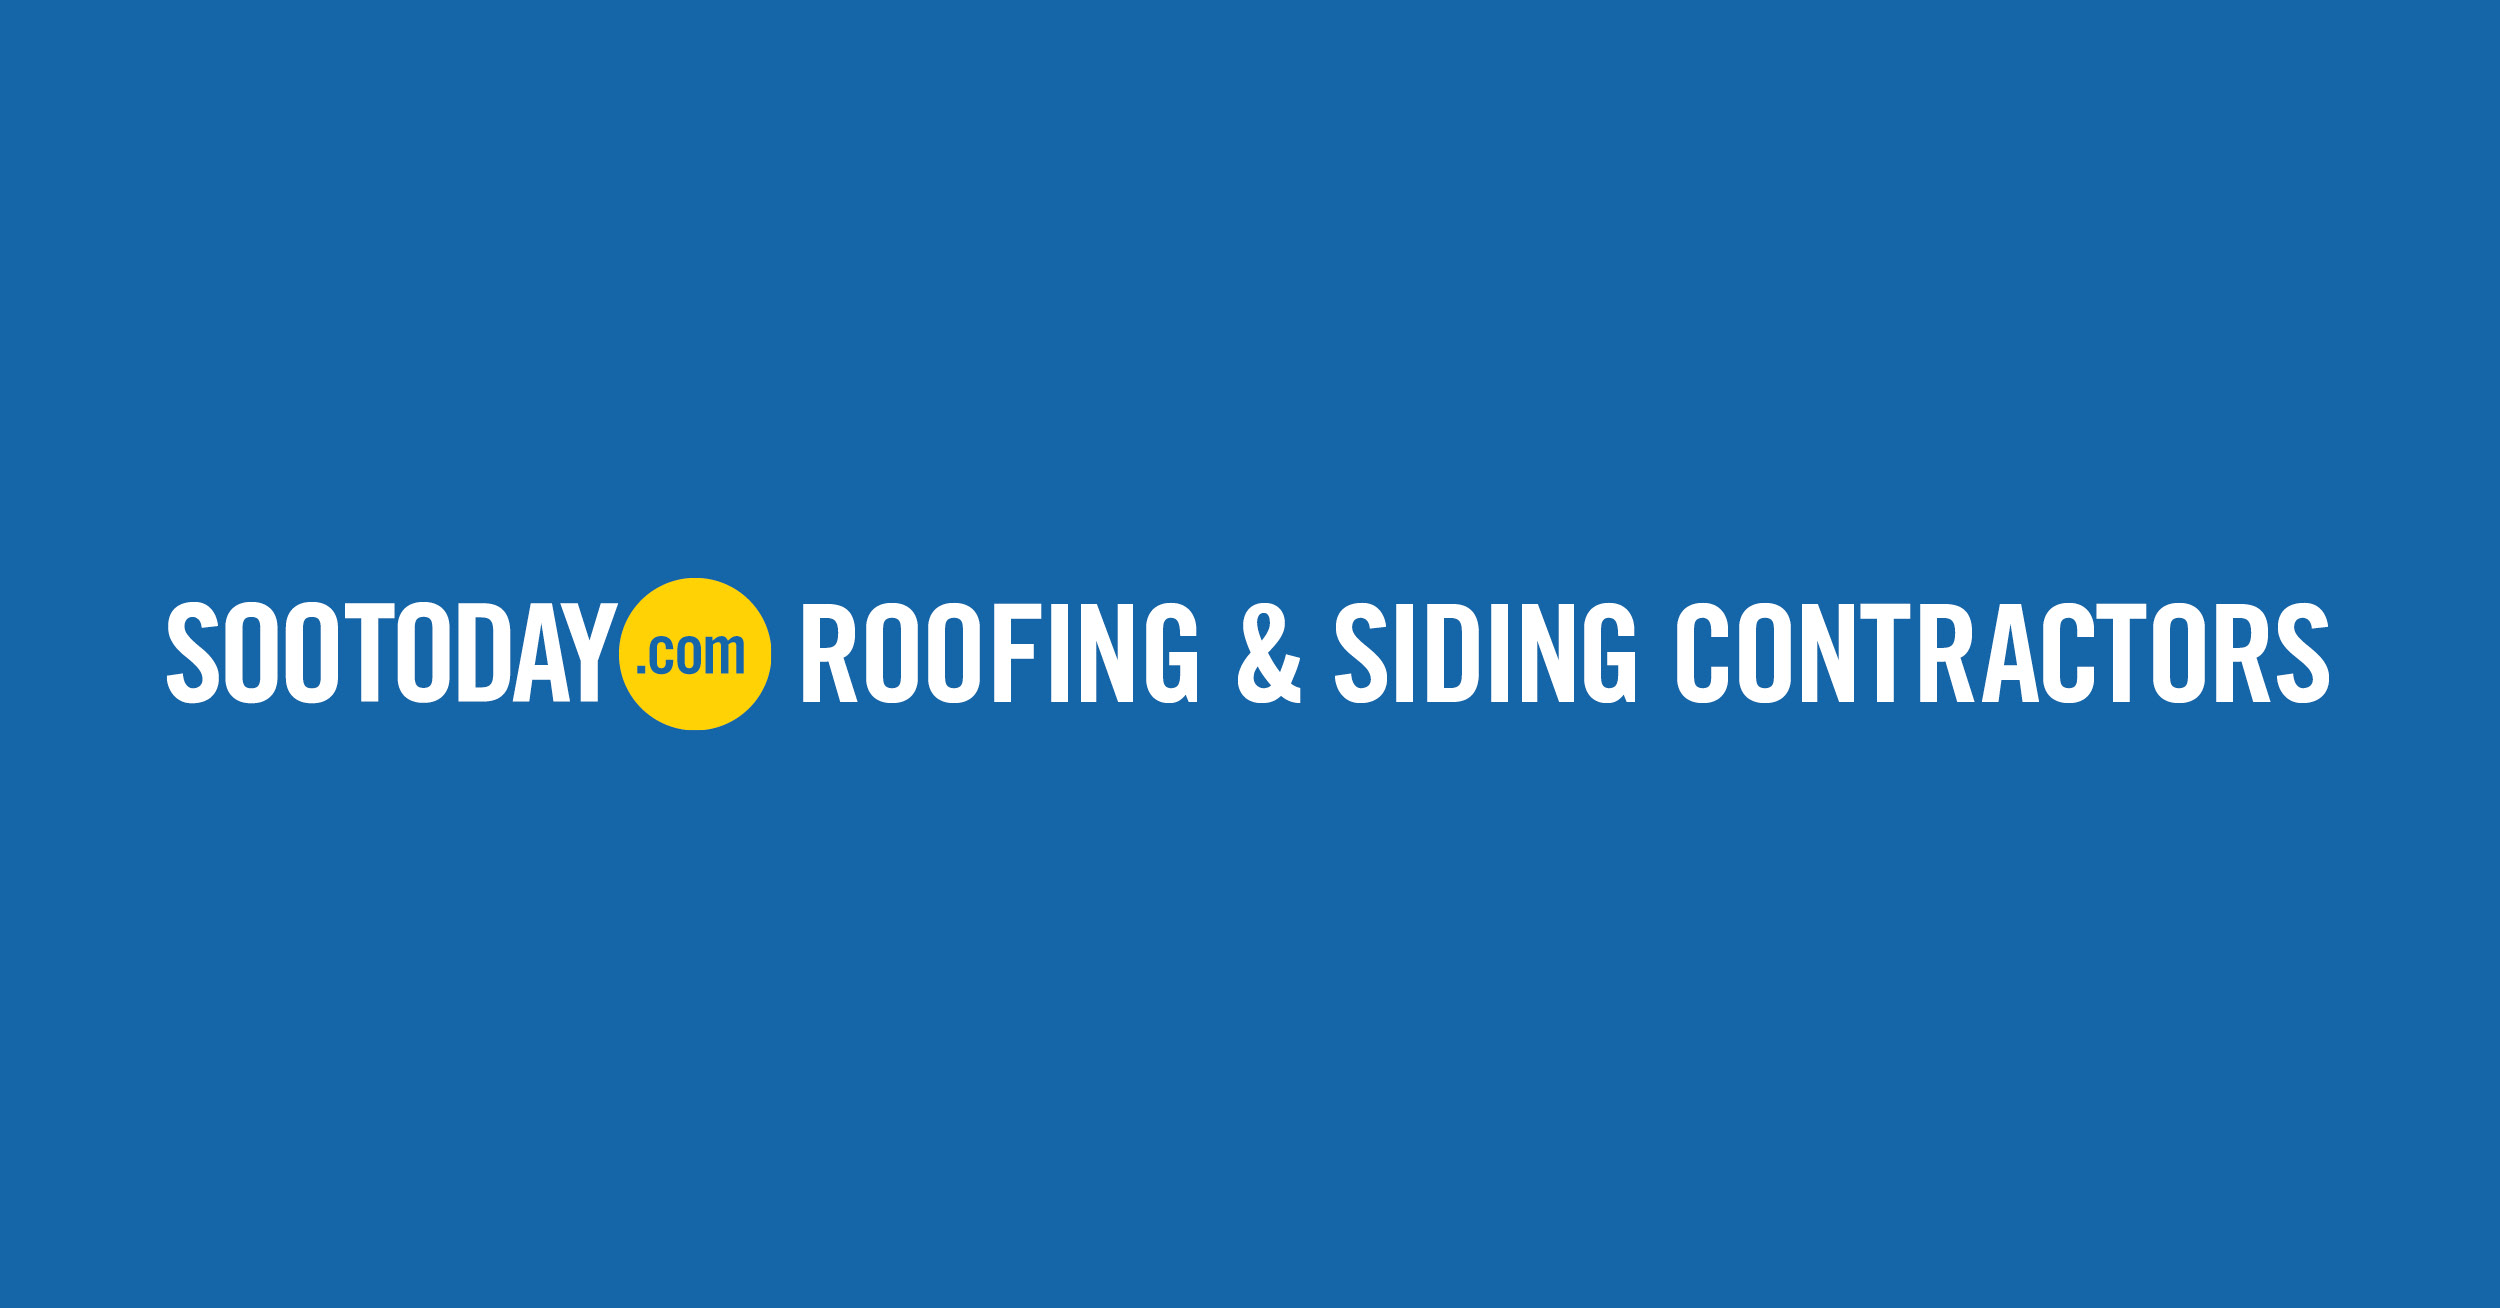 Sault Ste Marie Roofing and Siding Contractors - Sault Ste. Marie News